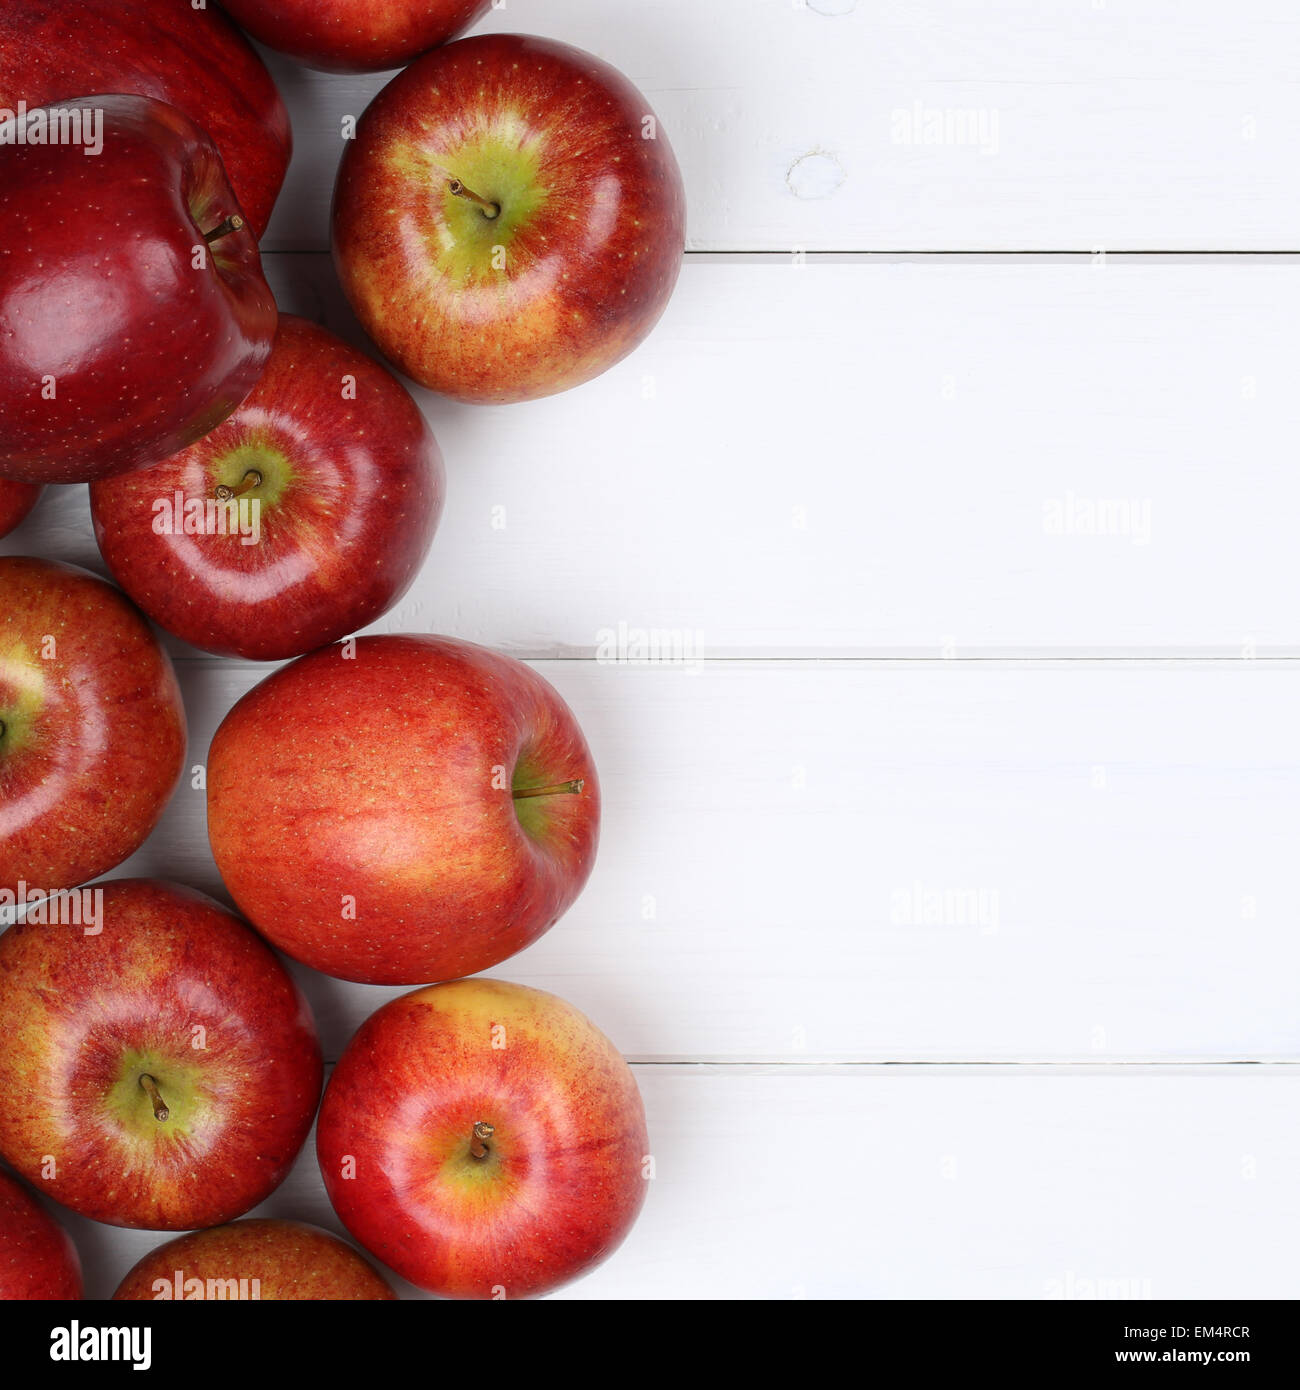 Red apple apples fruits on a wooden board with copyspace Stock Photo